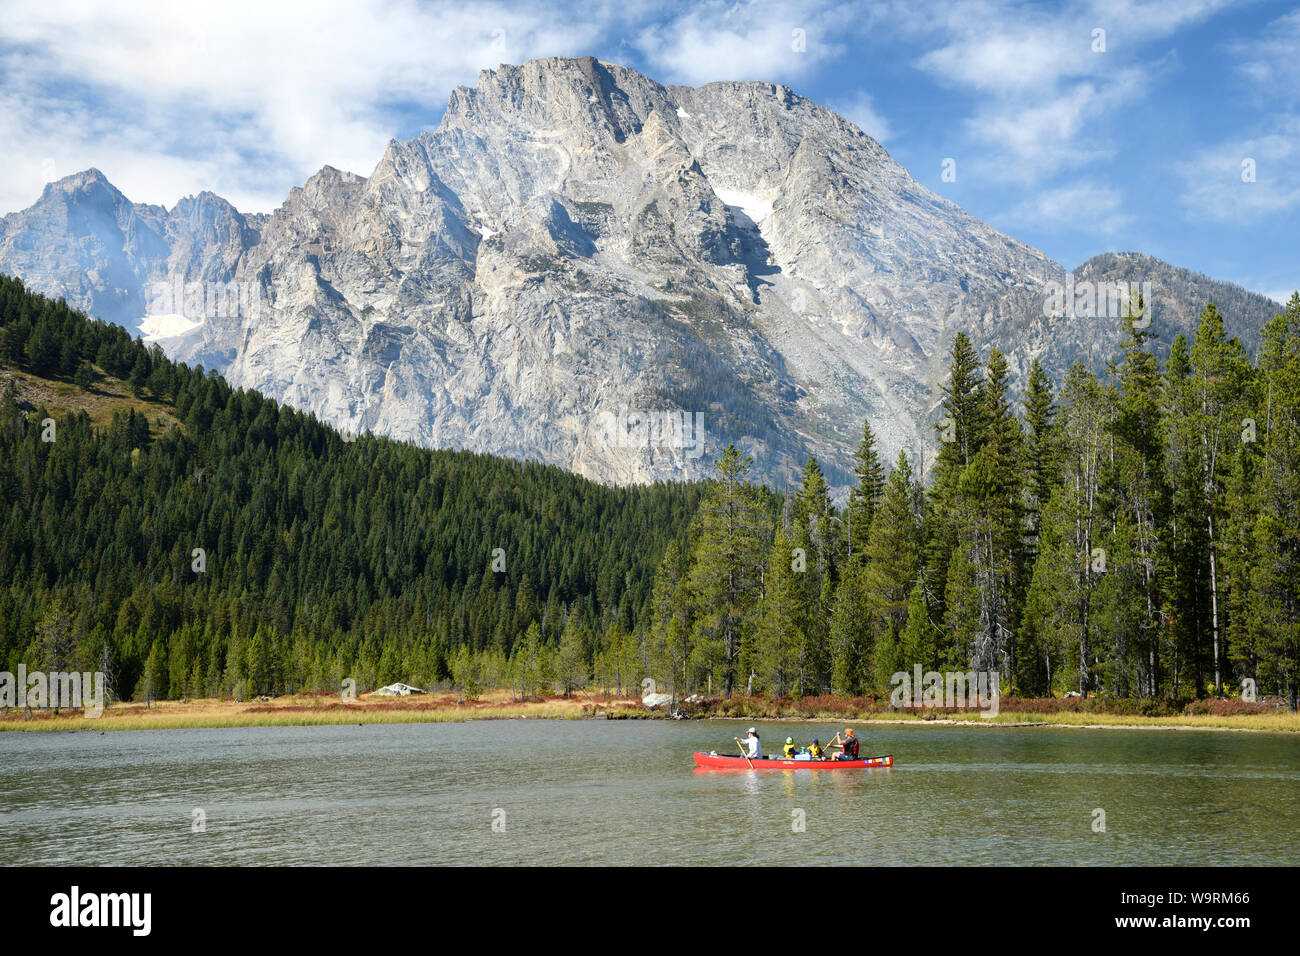 North America, American, USA, Rocky Mountains, West, Grand Teton National Park, Canoe on String lake with Mount Moran *** Local Caption *** Stock Photo